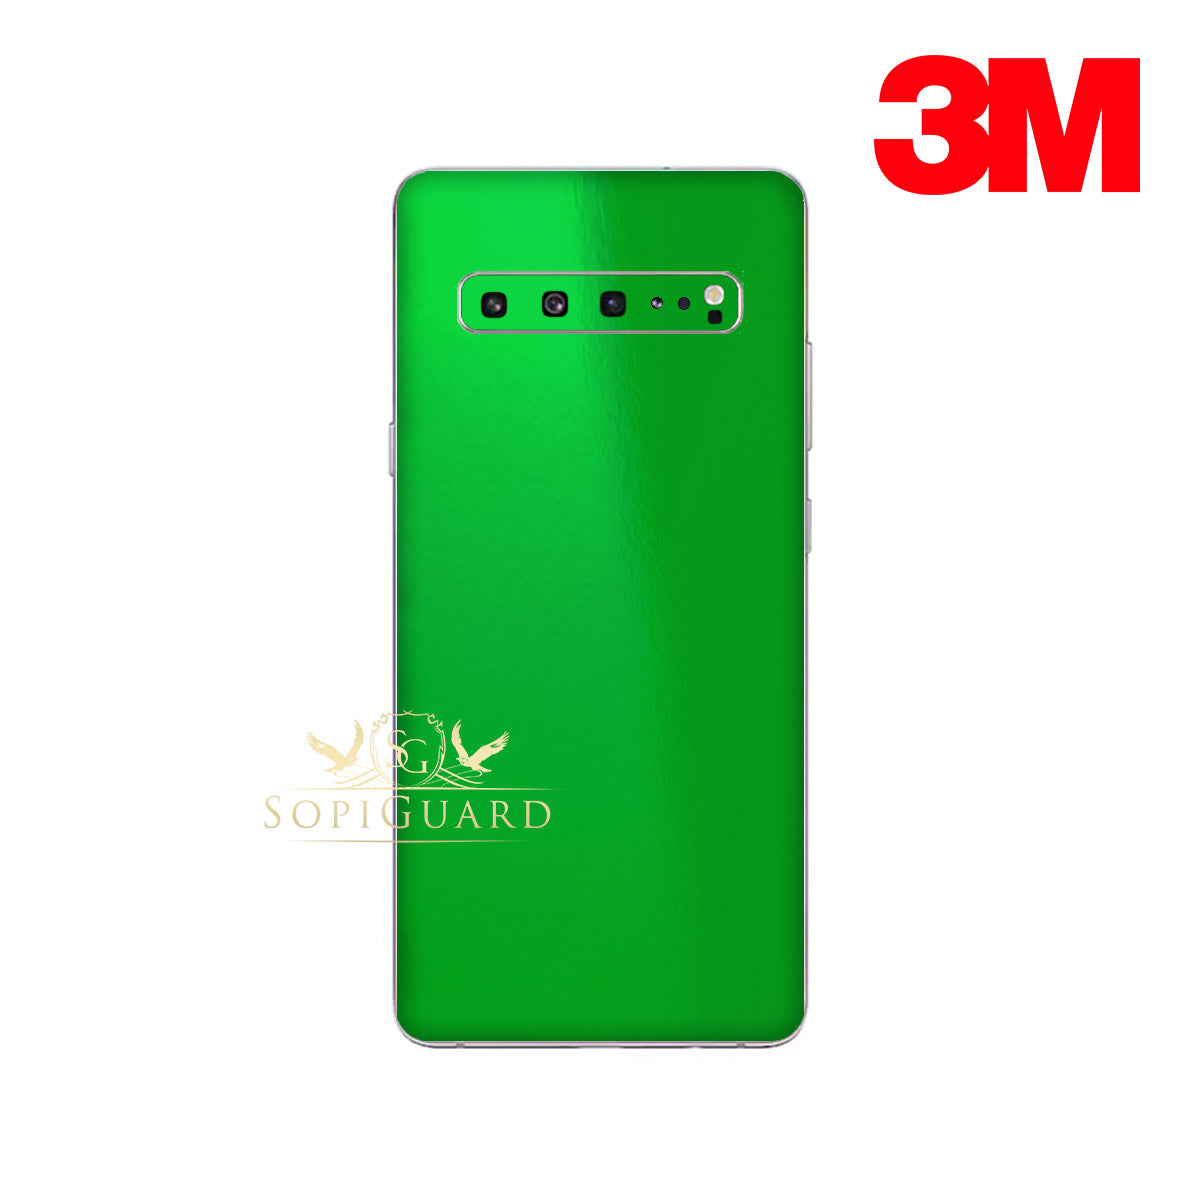 for Samsung S10 5G